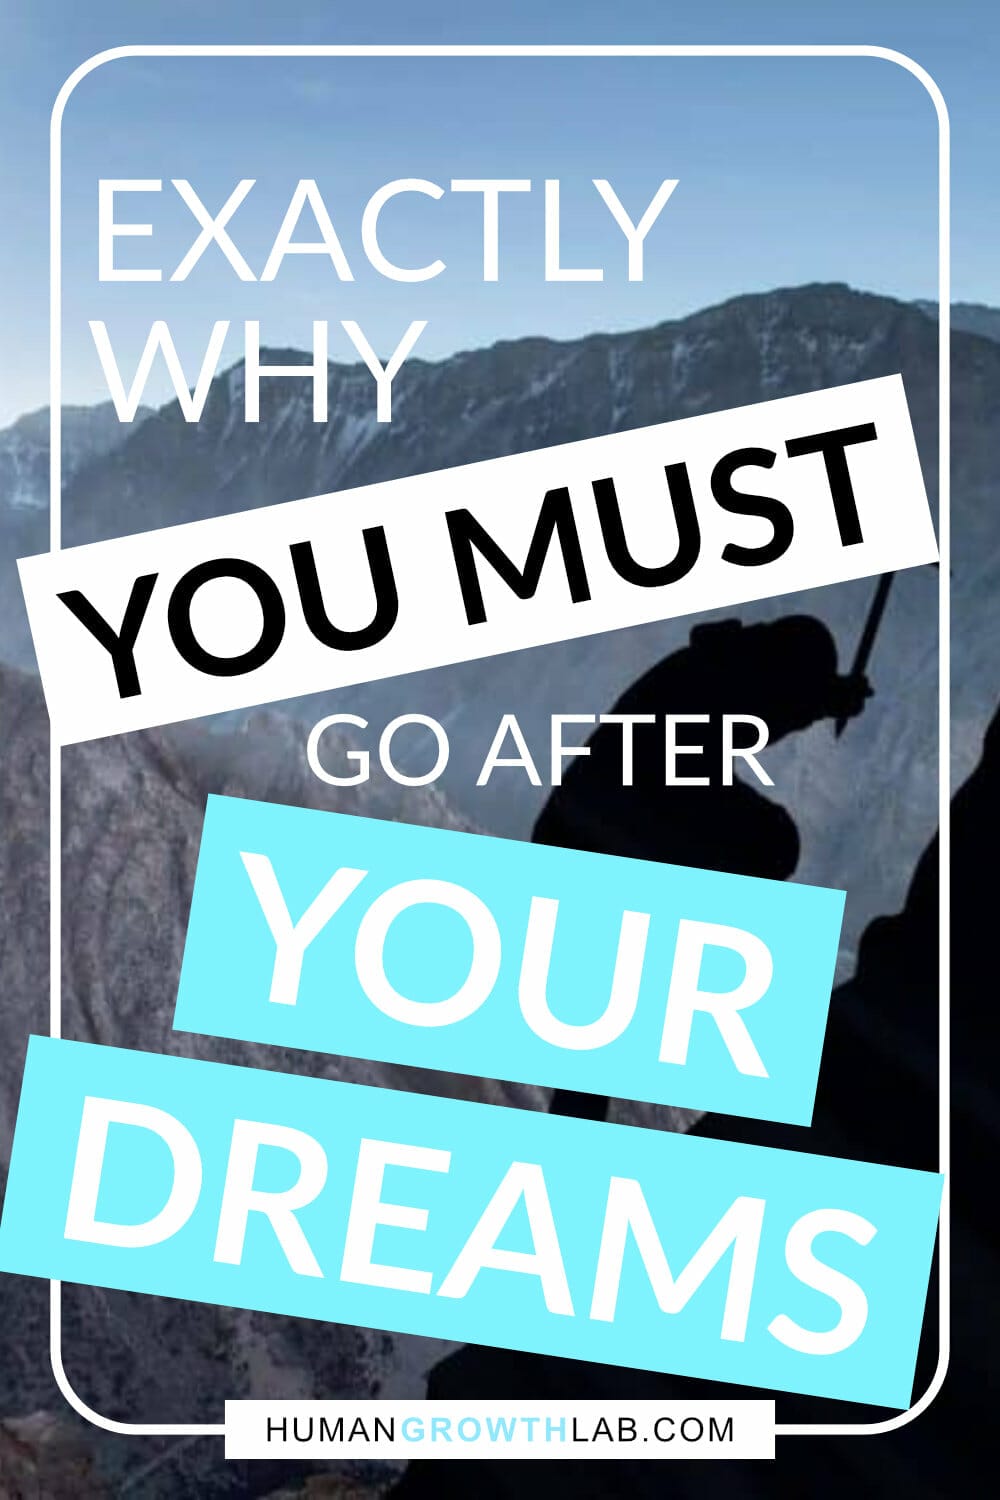 our dreams and ambitions are one of the most important things in life. They define who you are and who you could be. You deserve to go after them, no matter what. But it can often feel like you have to do what everyone else is doing and do and play it safe. This post will tell you EXACTLY why you MUST go after your dreams, or risk forever being unhappy and unfulfilled. via @humangrowthlab